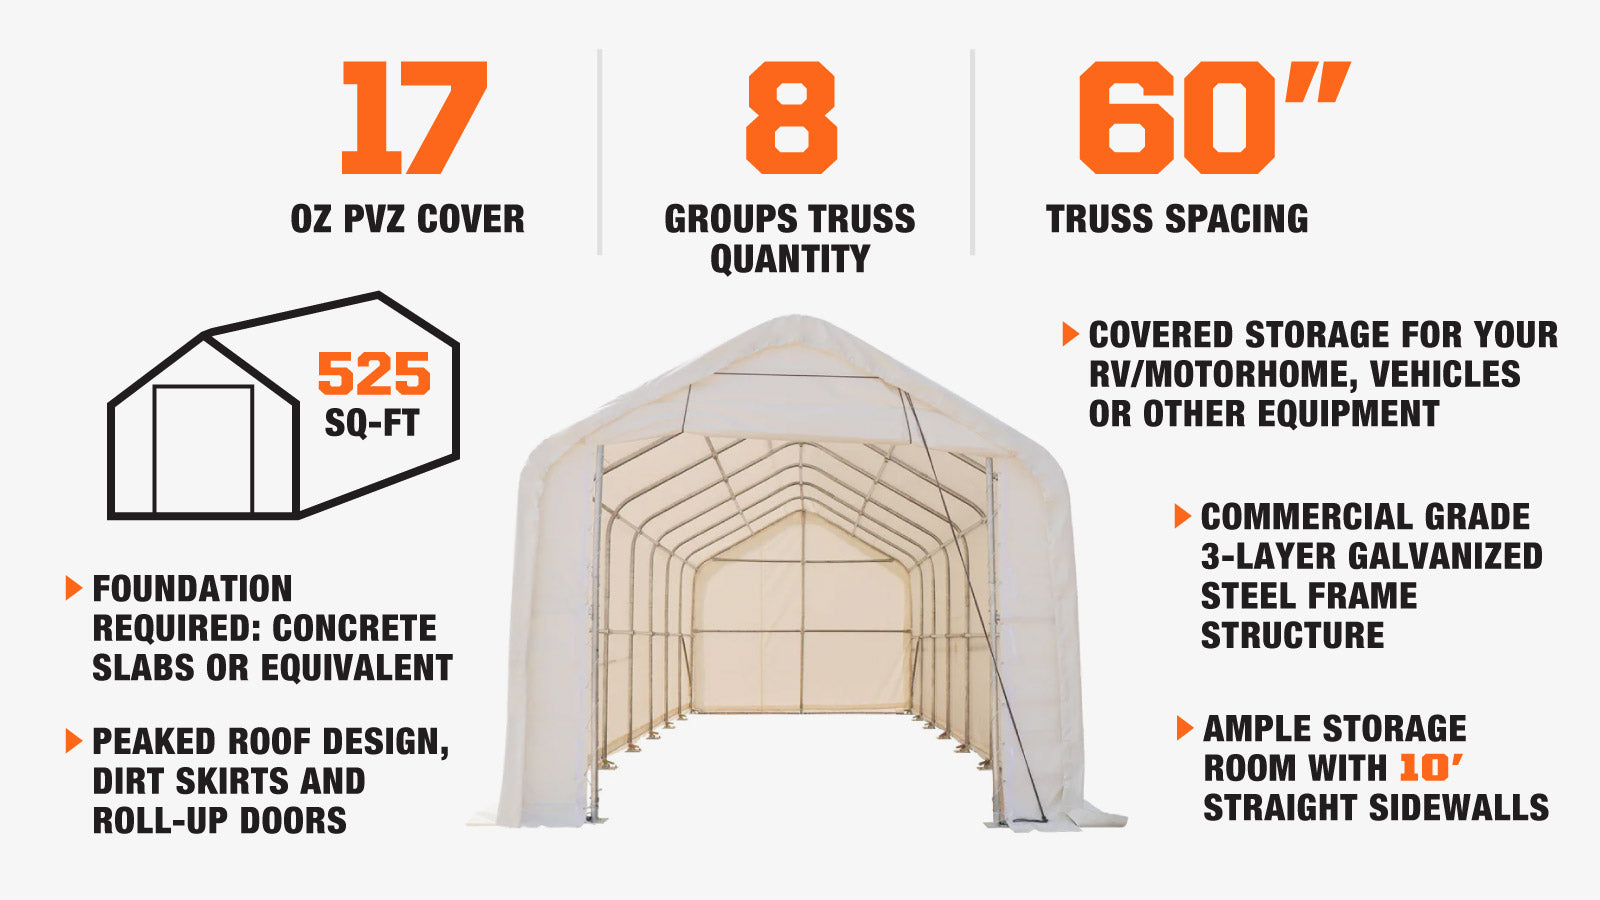 TMG Industrial 15’ x 35’ RV/Motorhome Storage Shelter, 17 oz PVC Fabric Cover, Front Roll-Up Door, Enclosed Rear Wall, 3-Layer Galvanized Steel Frame, 10’ Straight Sidewalls, TMG-ST1535-description-image